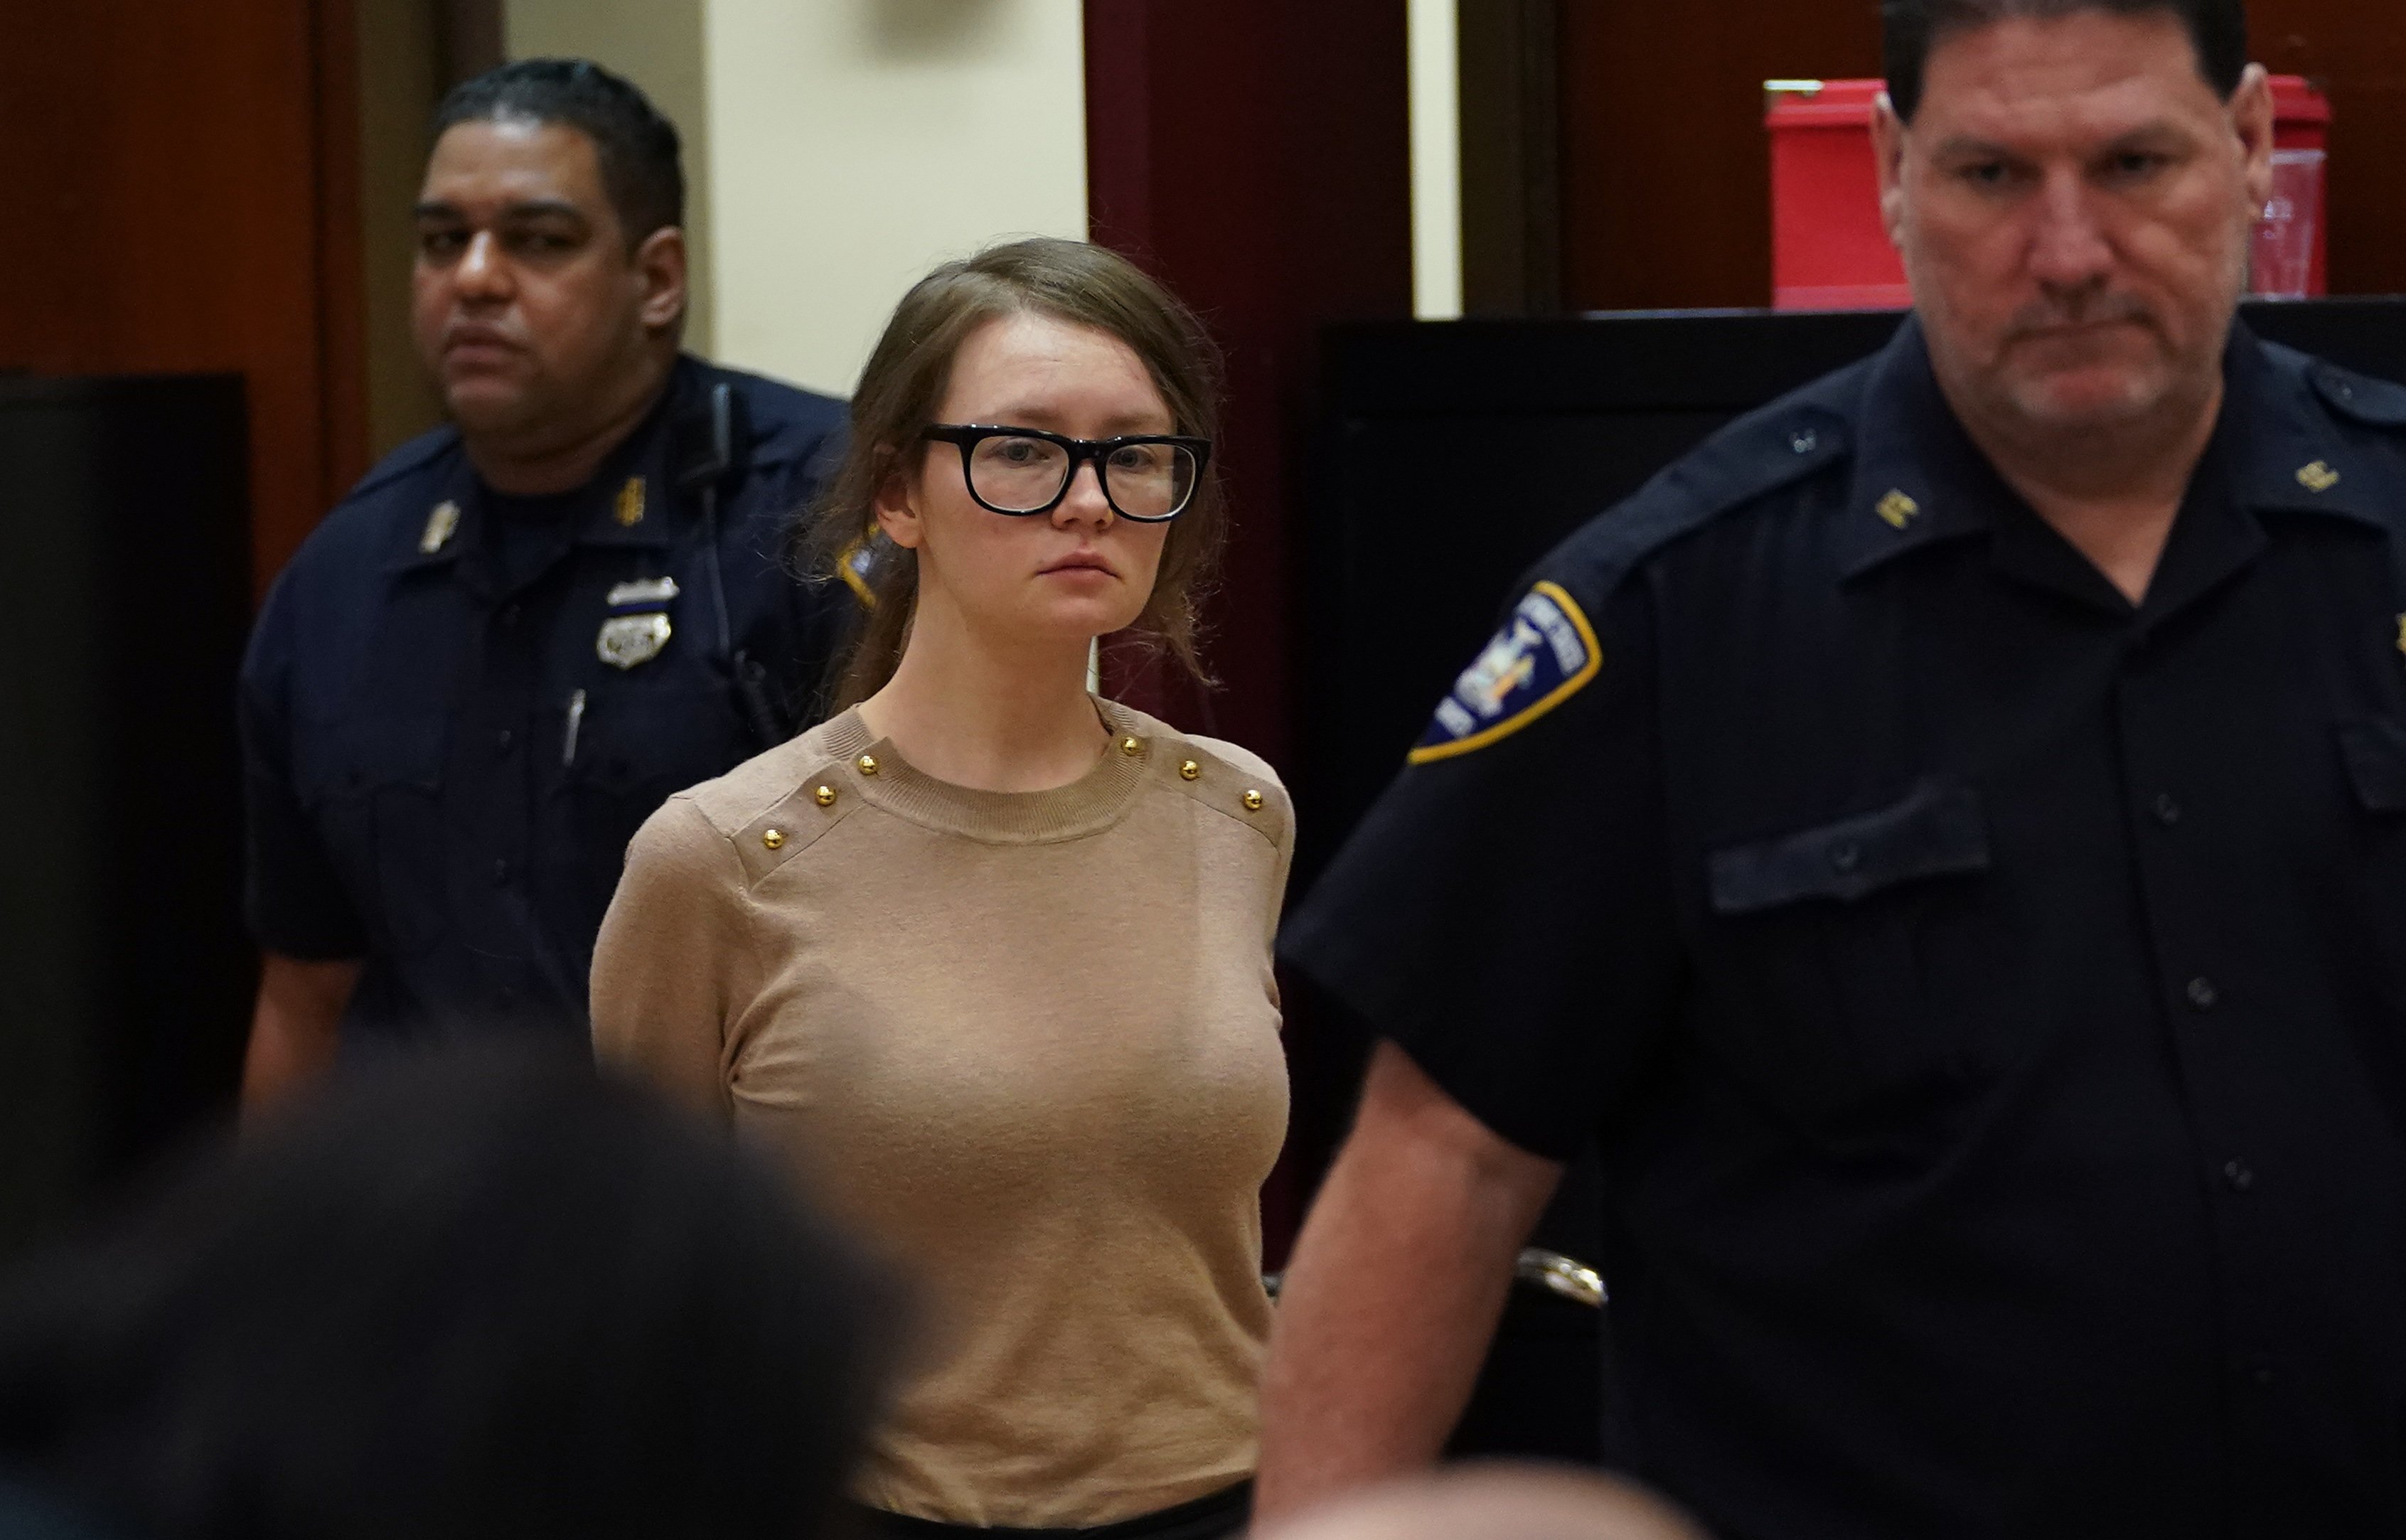 Anna Delvey at New York State Supreme Court in New York on April 11, 2019. | Sources: Getty Images